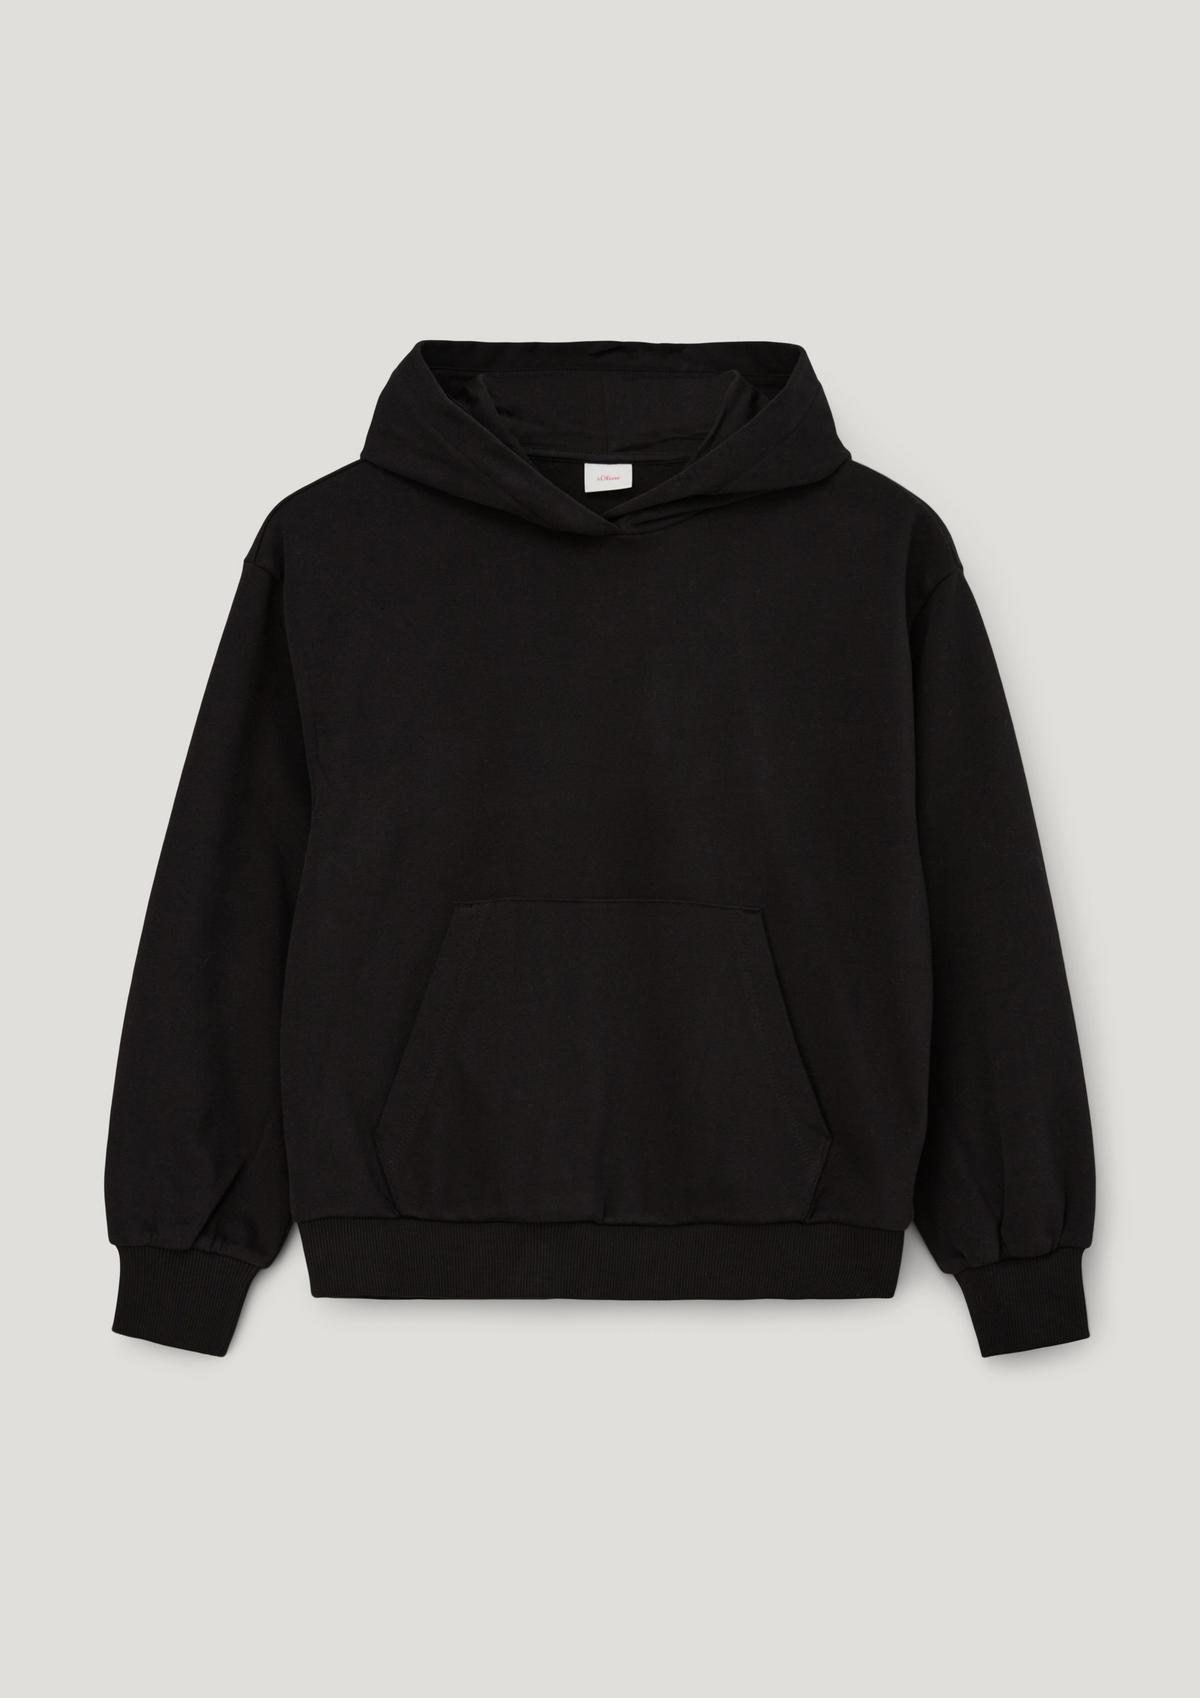 Weekday regular fit zip up hoodie with embroidery graphic in black